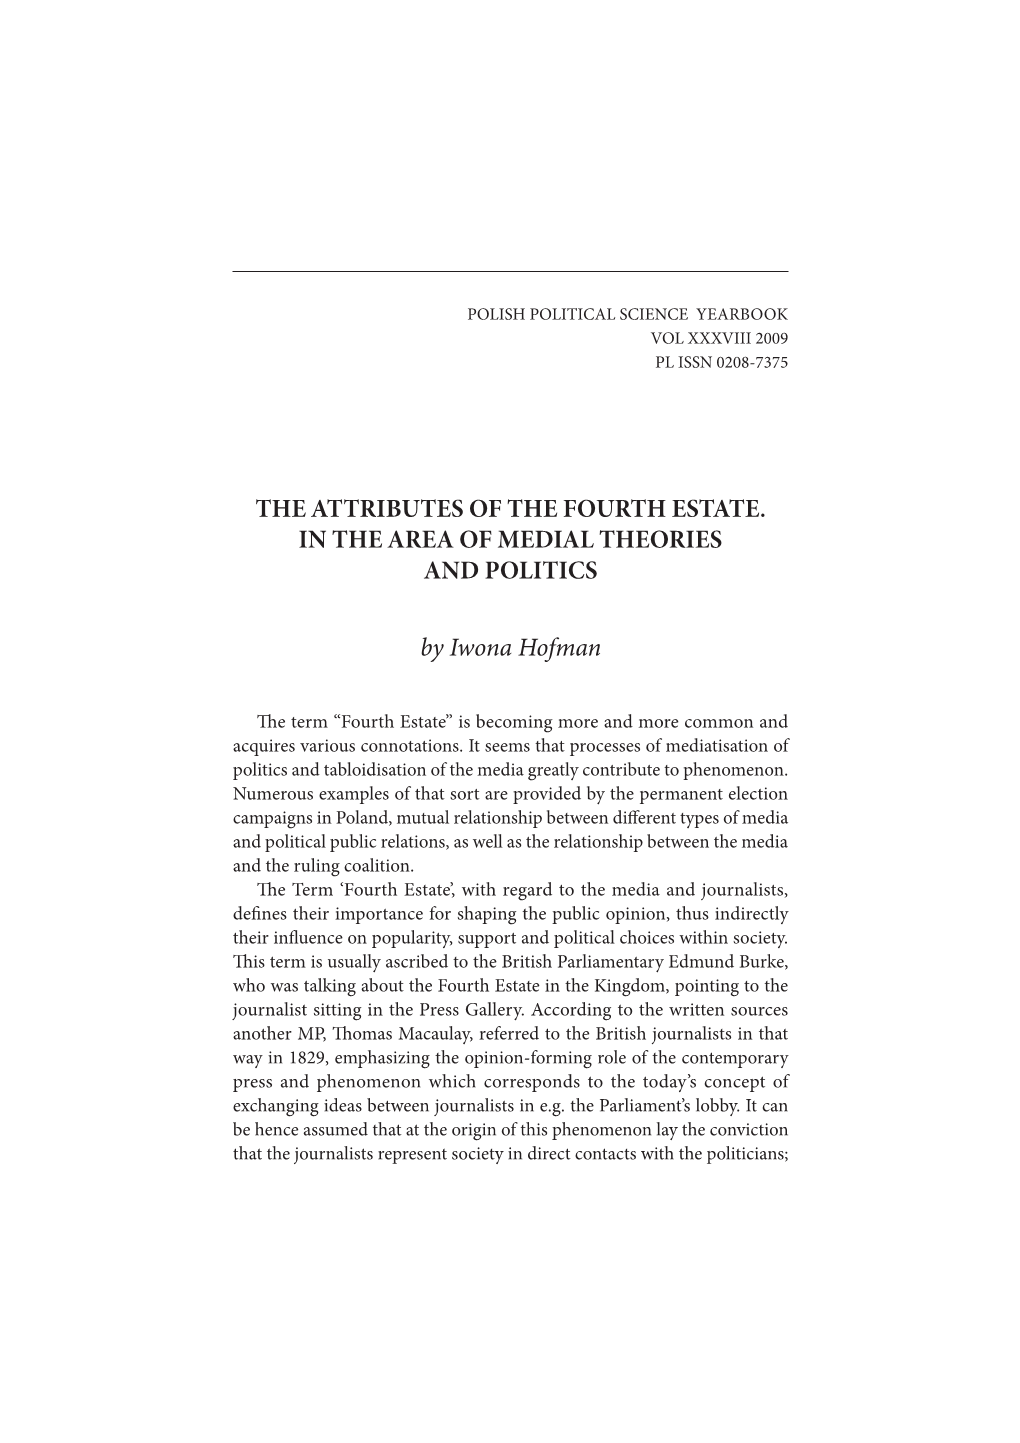 THE ATTRIBUTES of the FOURTH ESTATE . in the AREA of MEDIAL THEORIES and POLITICS by Iwona Hofman